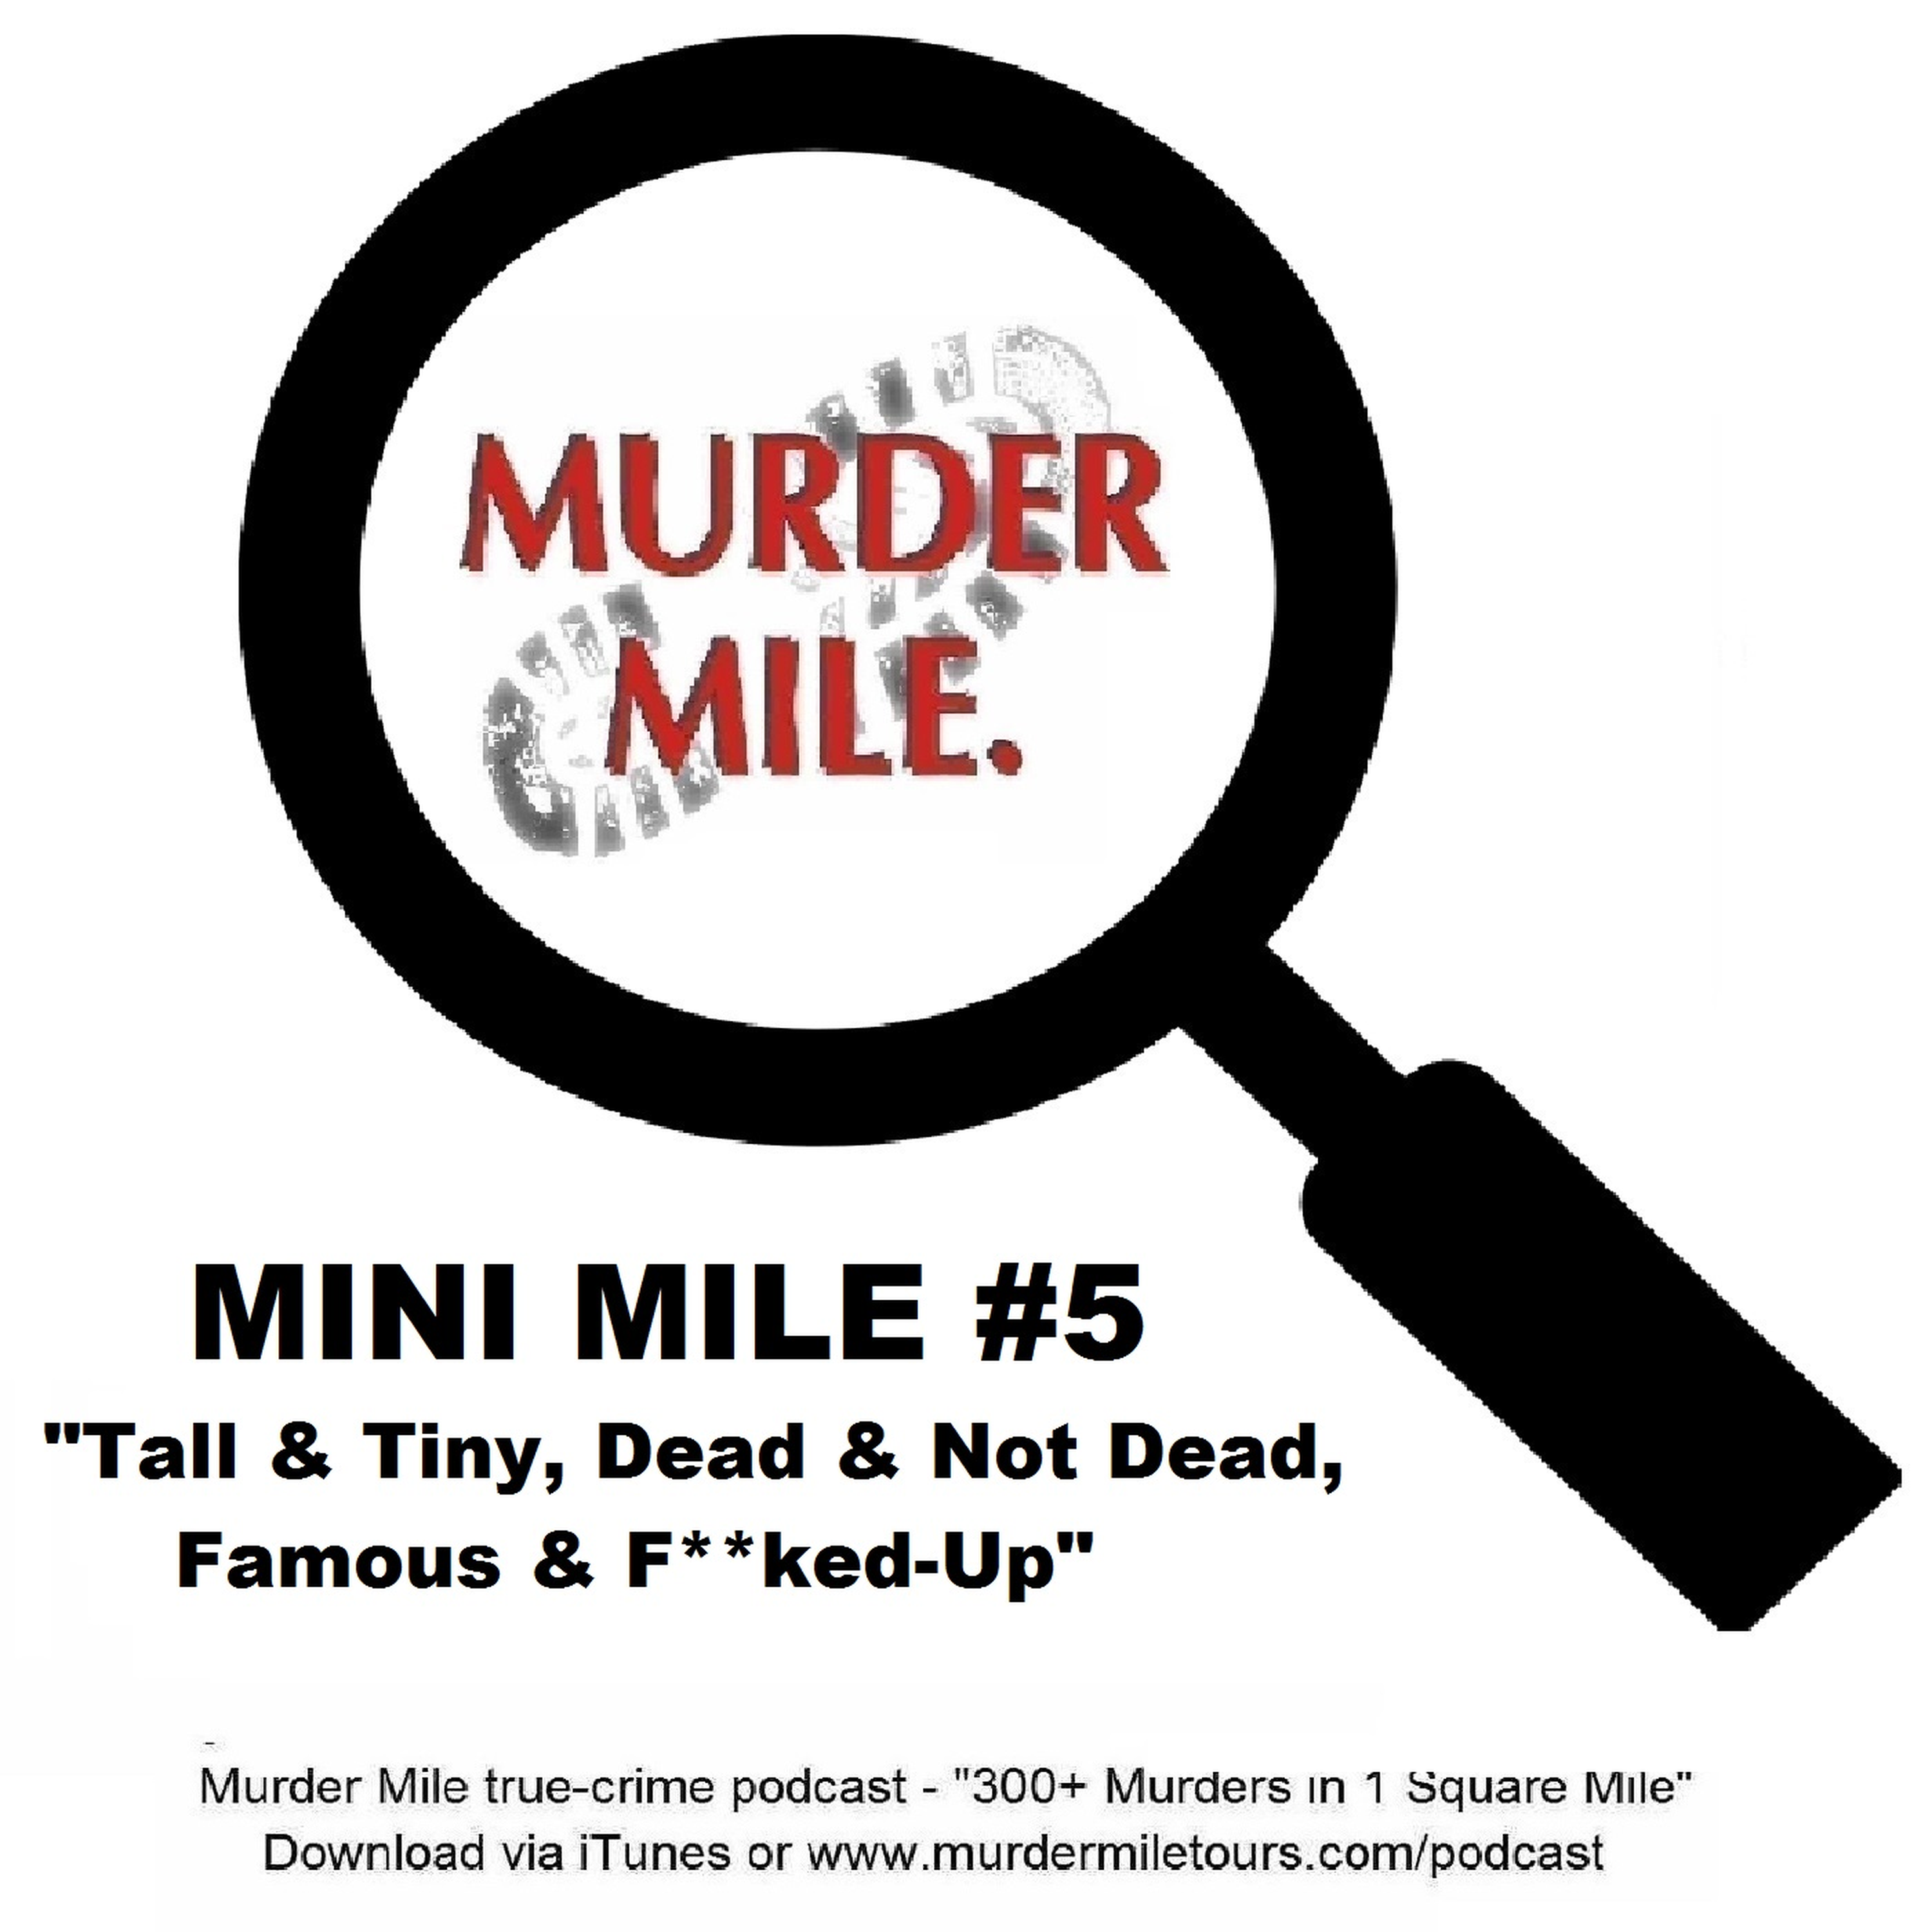 Mini Mile #5 - Tall & Tiny, Dead & Not Dead, Famous & F**ked-Up